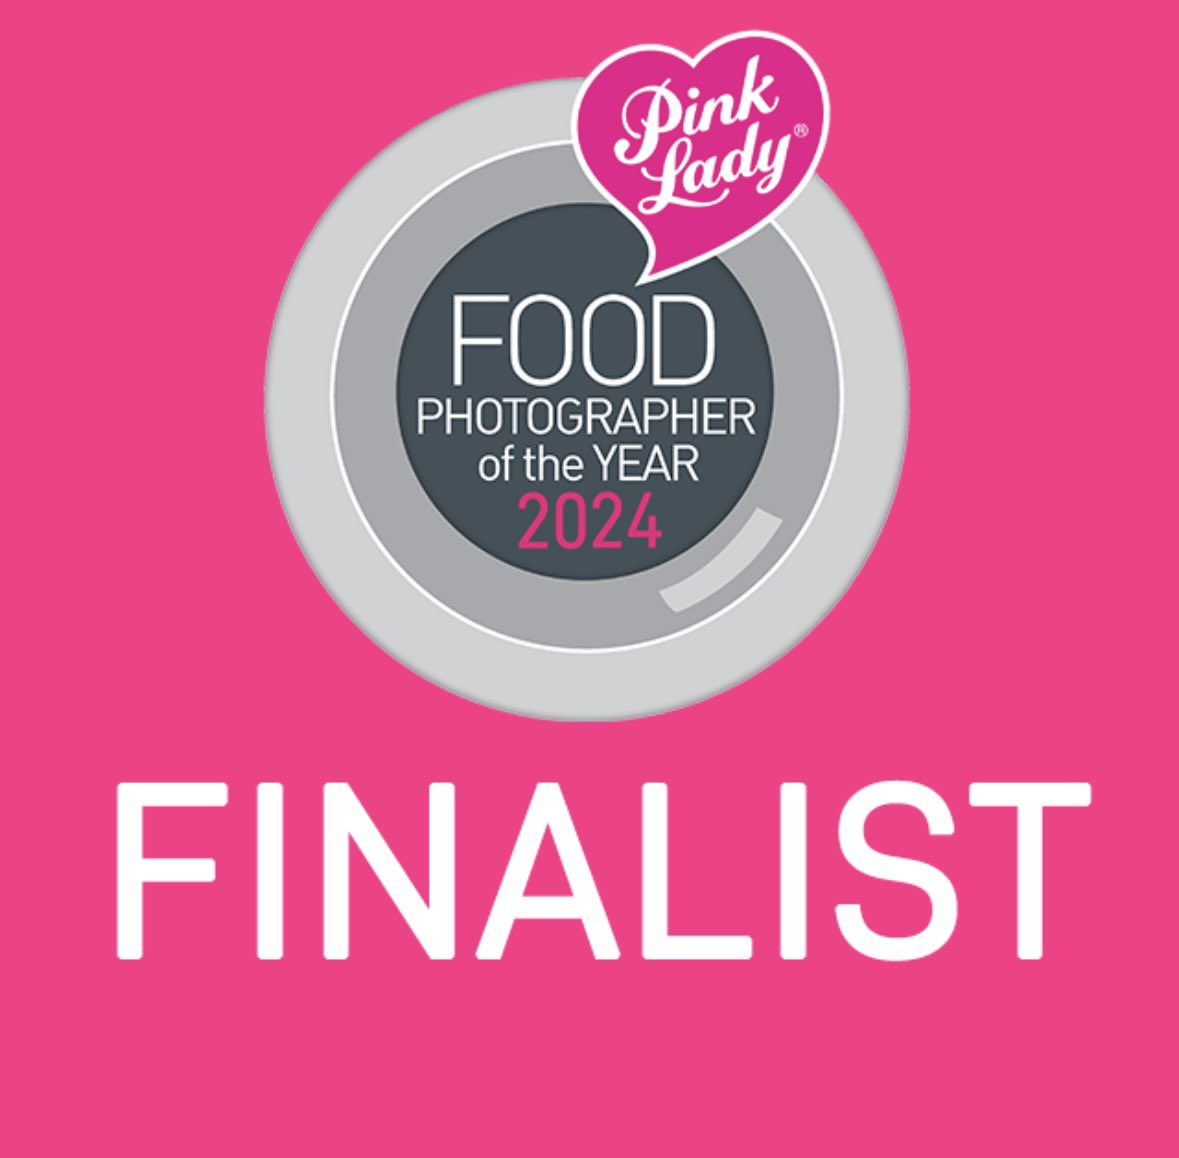 Stoked to announce that I’m a Finalist in the Pink Lady® Food Photographer of the Year 2024 🥳 @FoodPhotoAward 🍎
Impressive  images and some stunning #photography 
🤞 🏆 
#foodphotoawards24 #photocontest #photocompetition
@Pinkladyappleuk
@Taittinger_INTL 🍾
@The_RPS
@mpbcom 📸